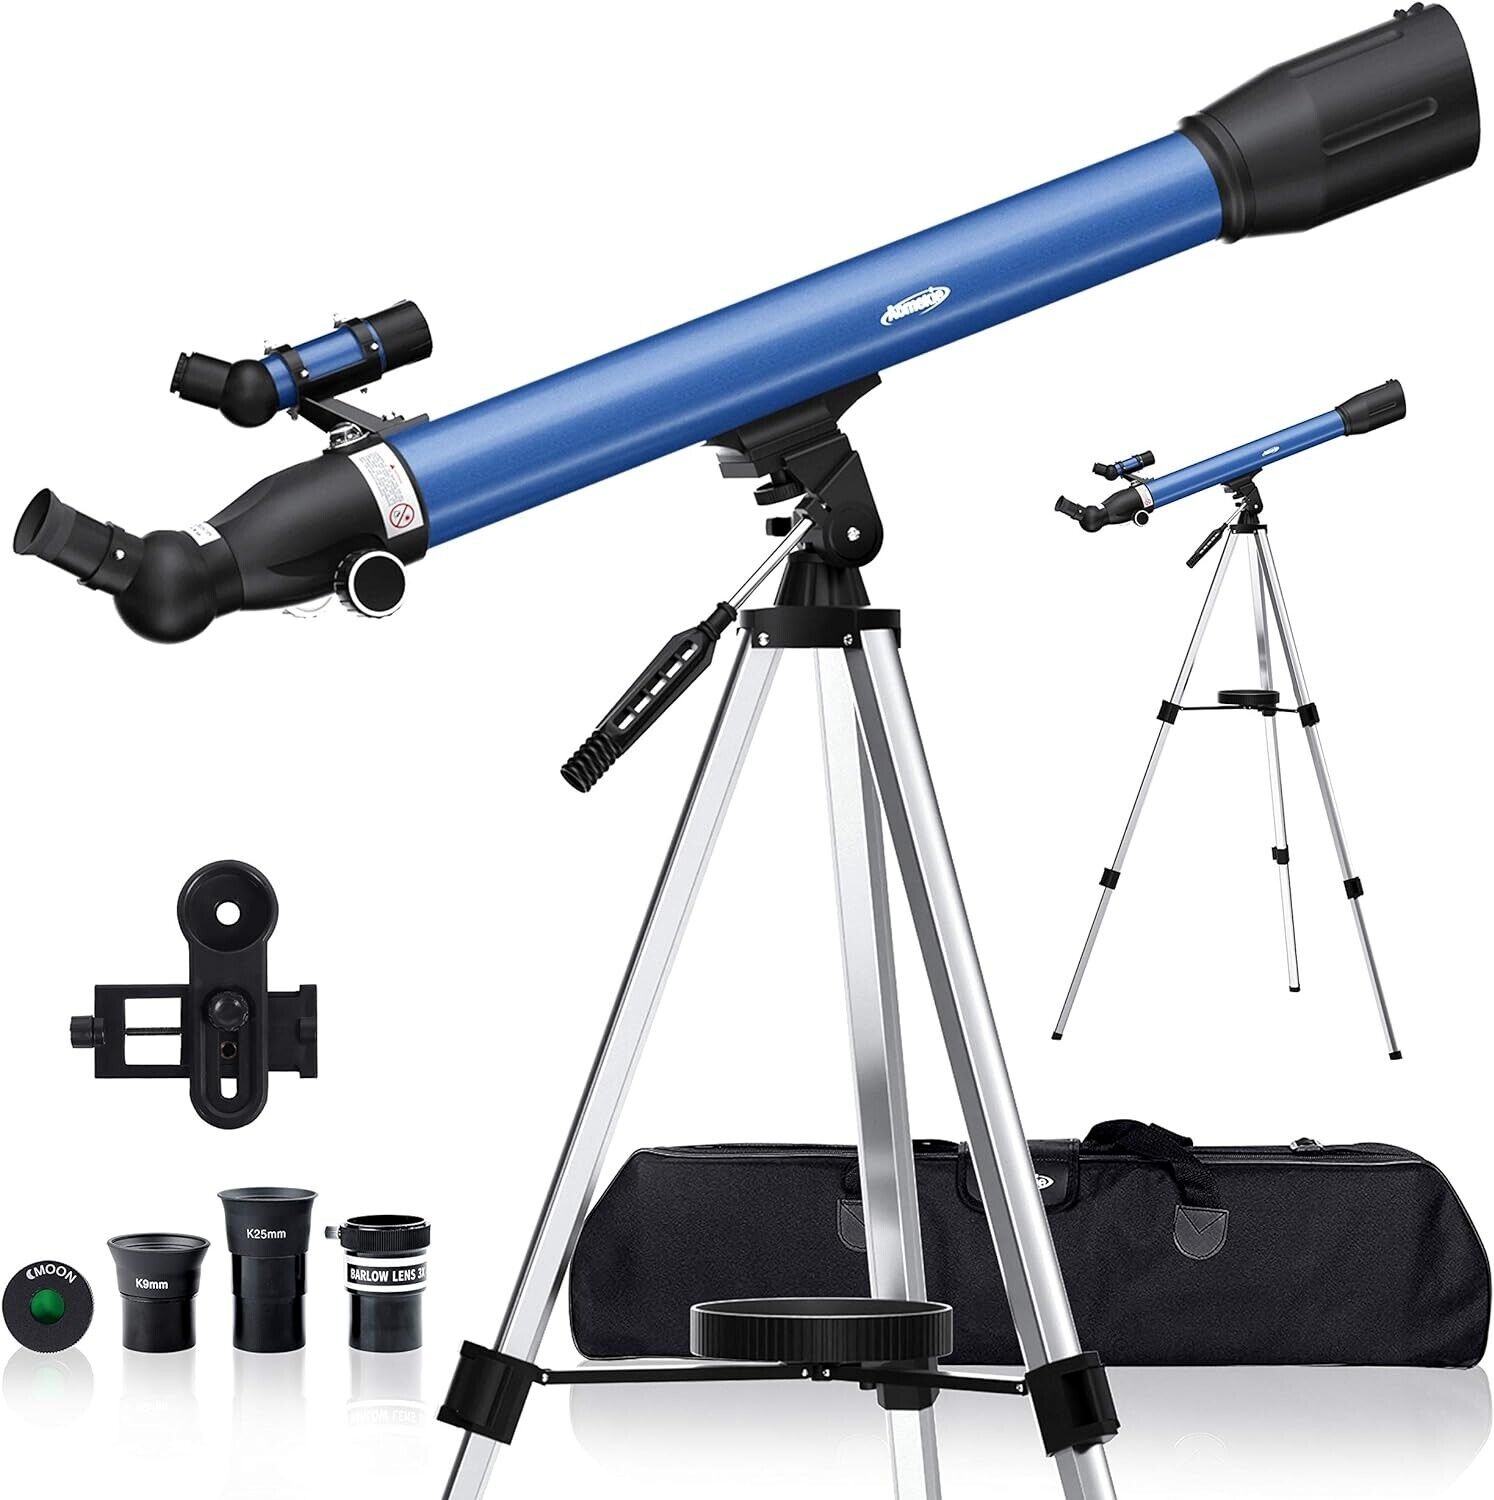 WOW 🔭 234X 60MMx700MM STAINLESS STEEL ADJUSTABLE Telescope ALL-IN-1 KIT TRIPOD